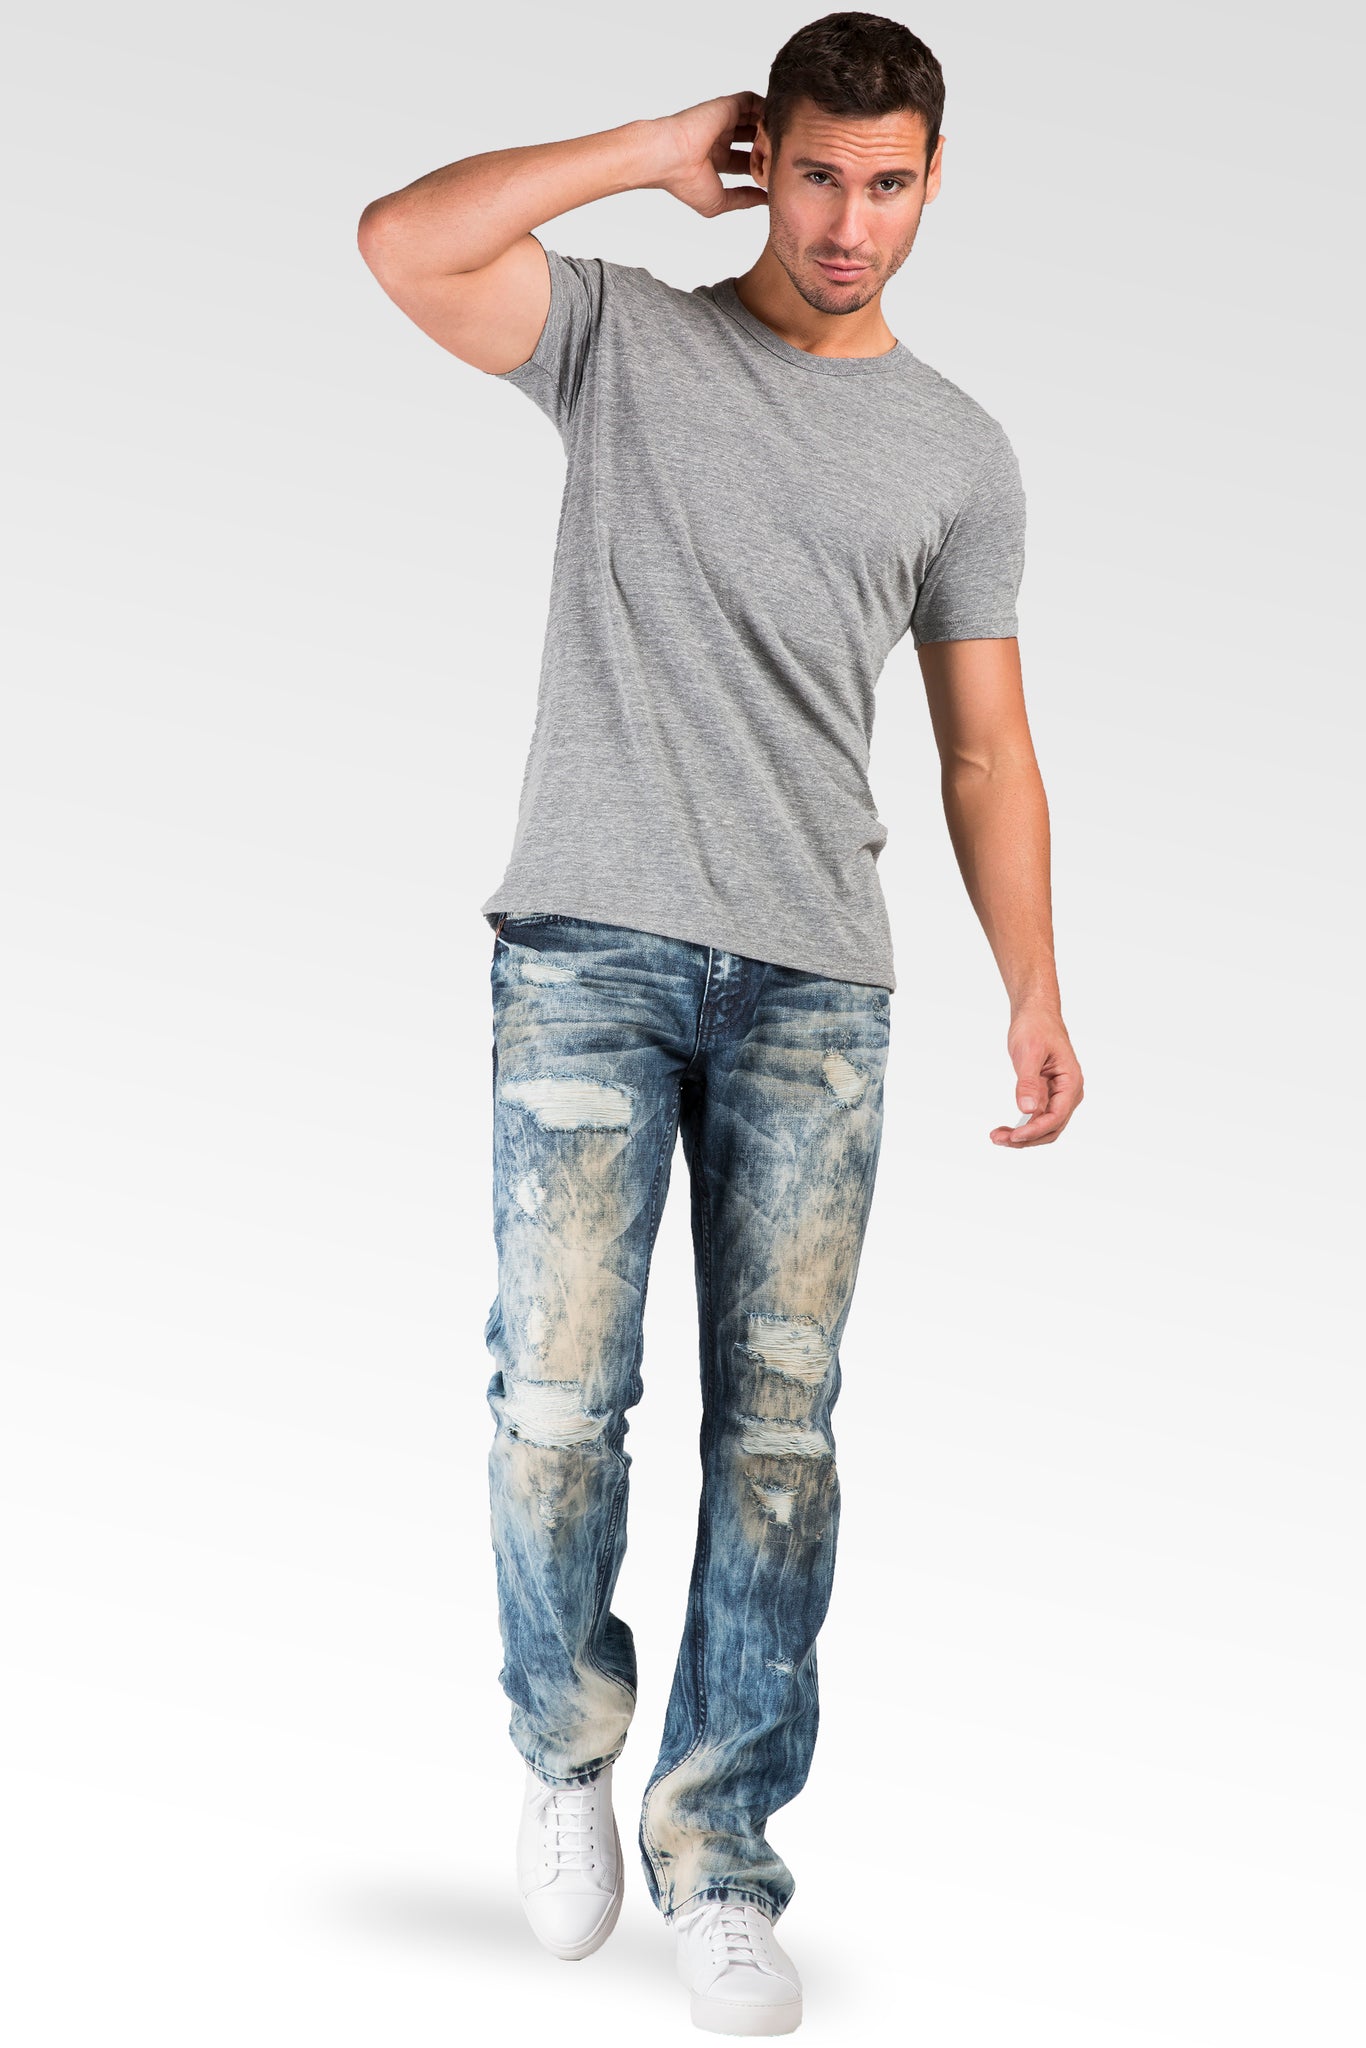 Level 7 Men's Relaxed Straight Destroyed & Repaired Bleached Blue Jeans  Premium Denim – Level 7 Jeans